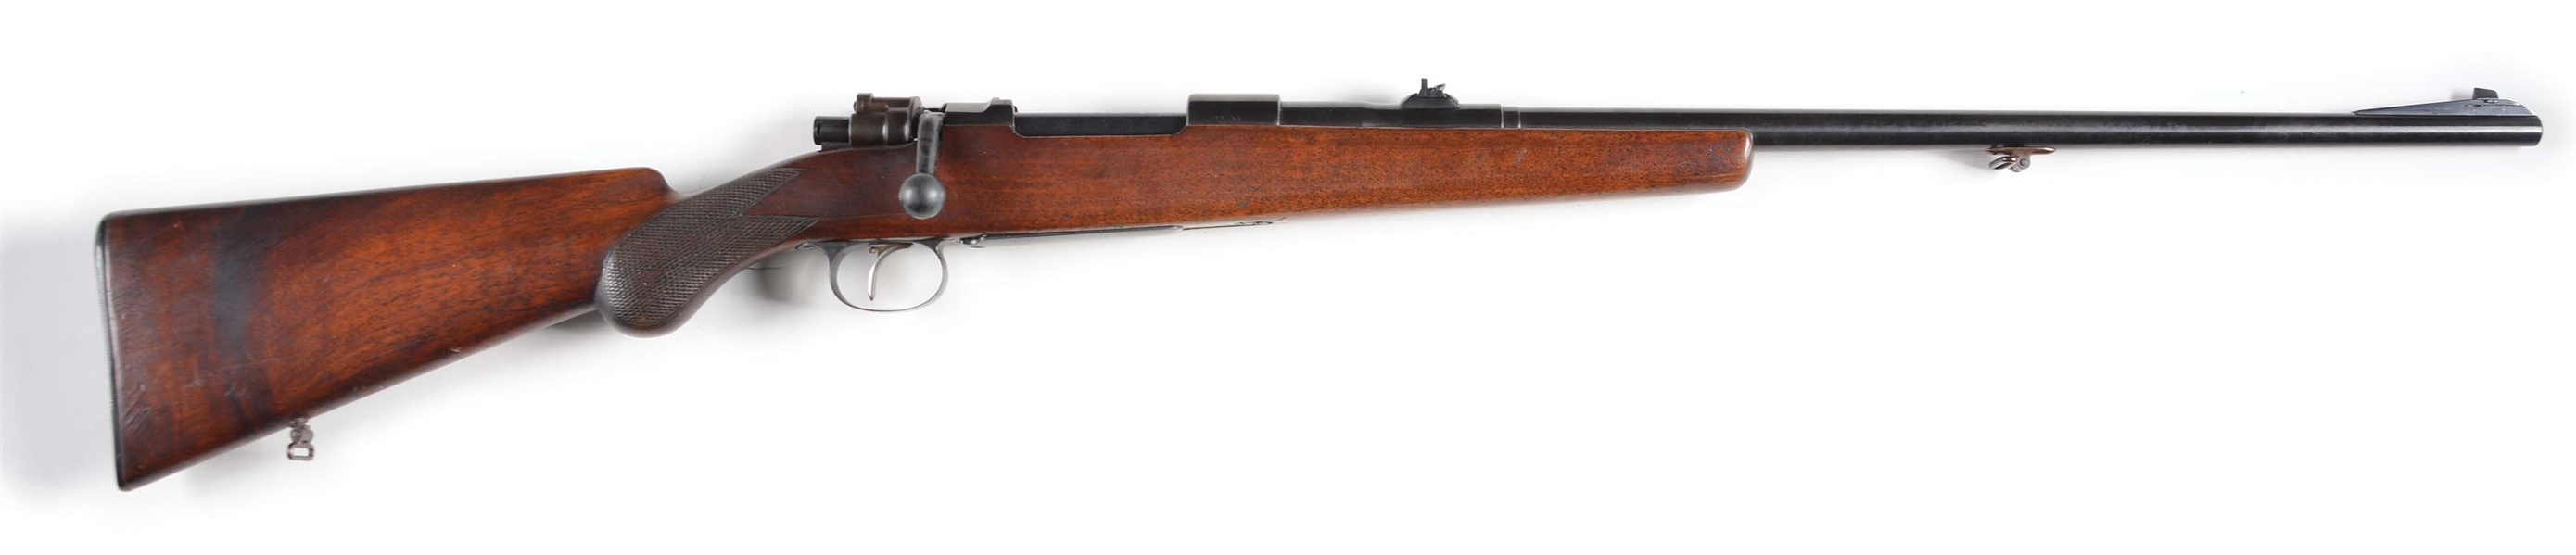 (M) FN COMMERCIAL MAUSER 98 BOLT ACTION RIFLE.